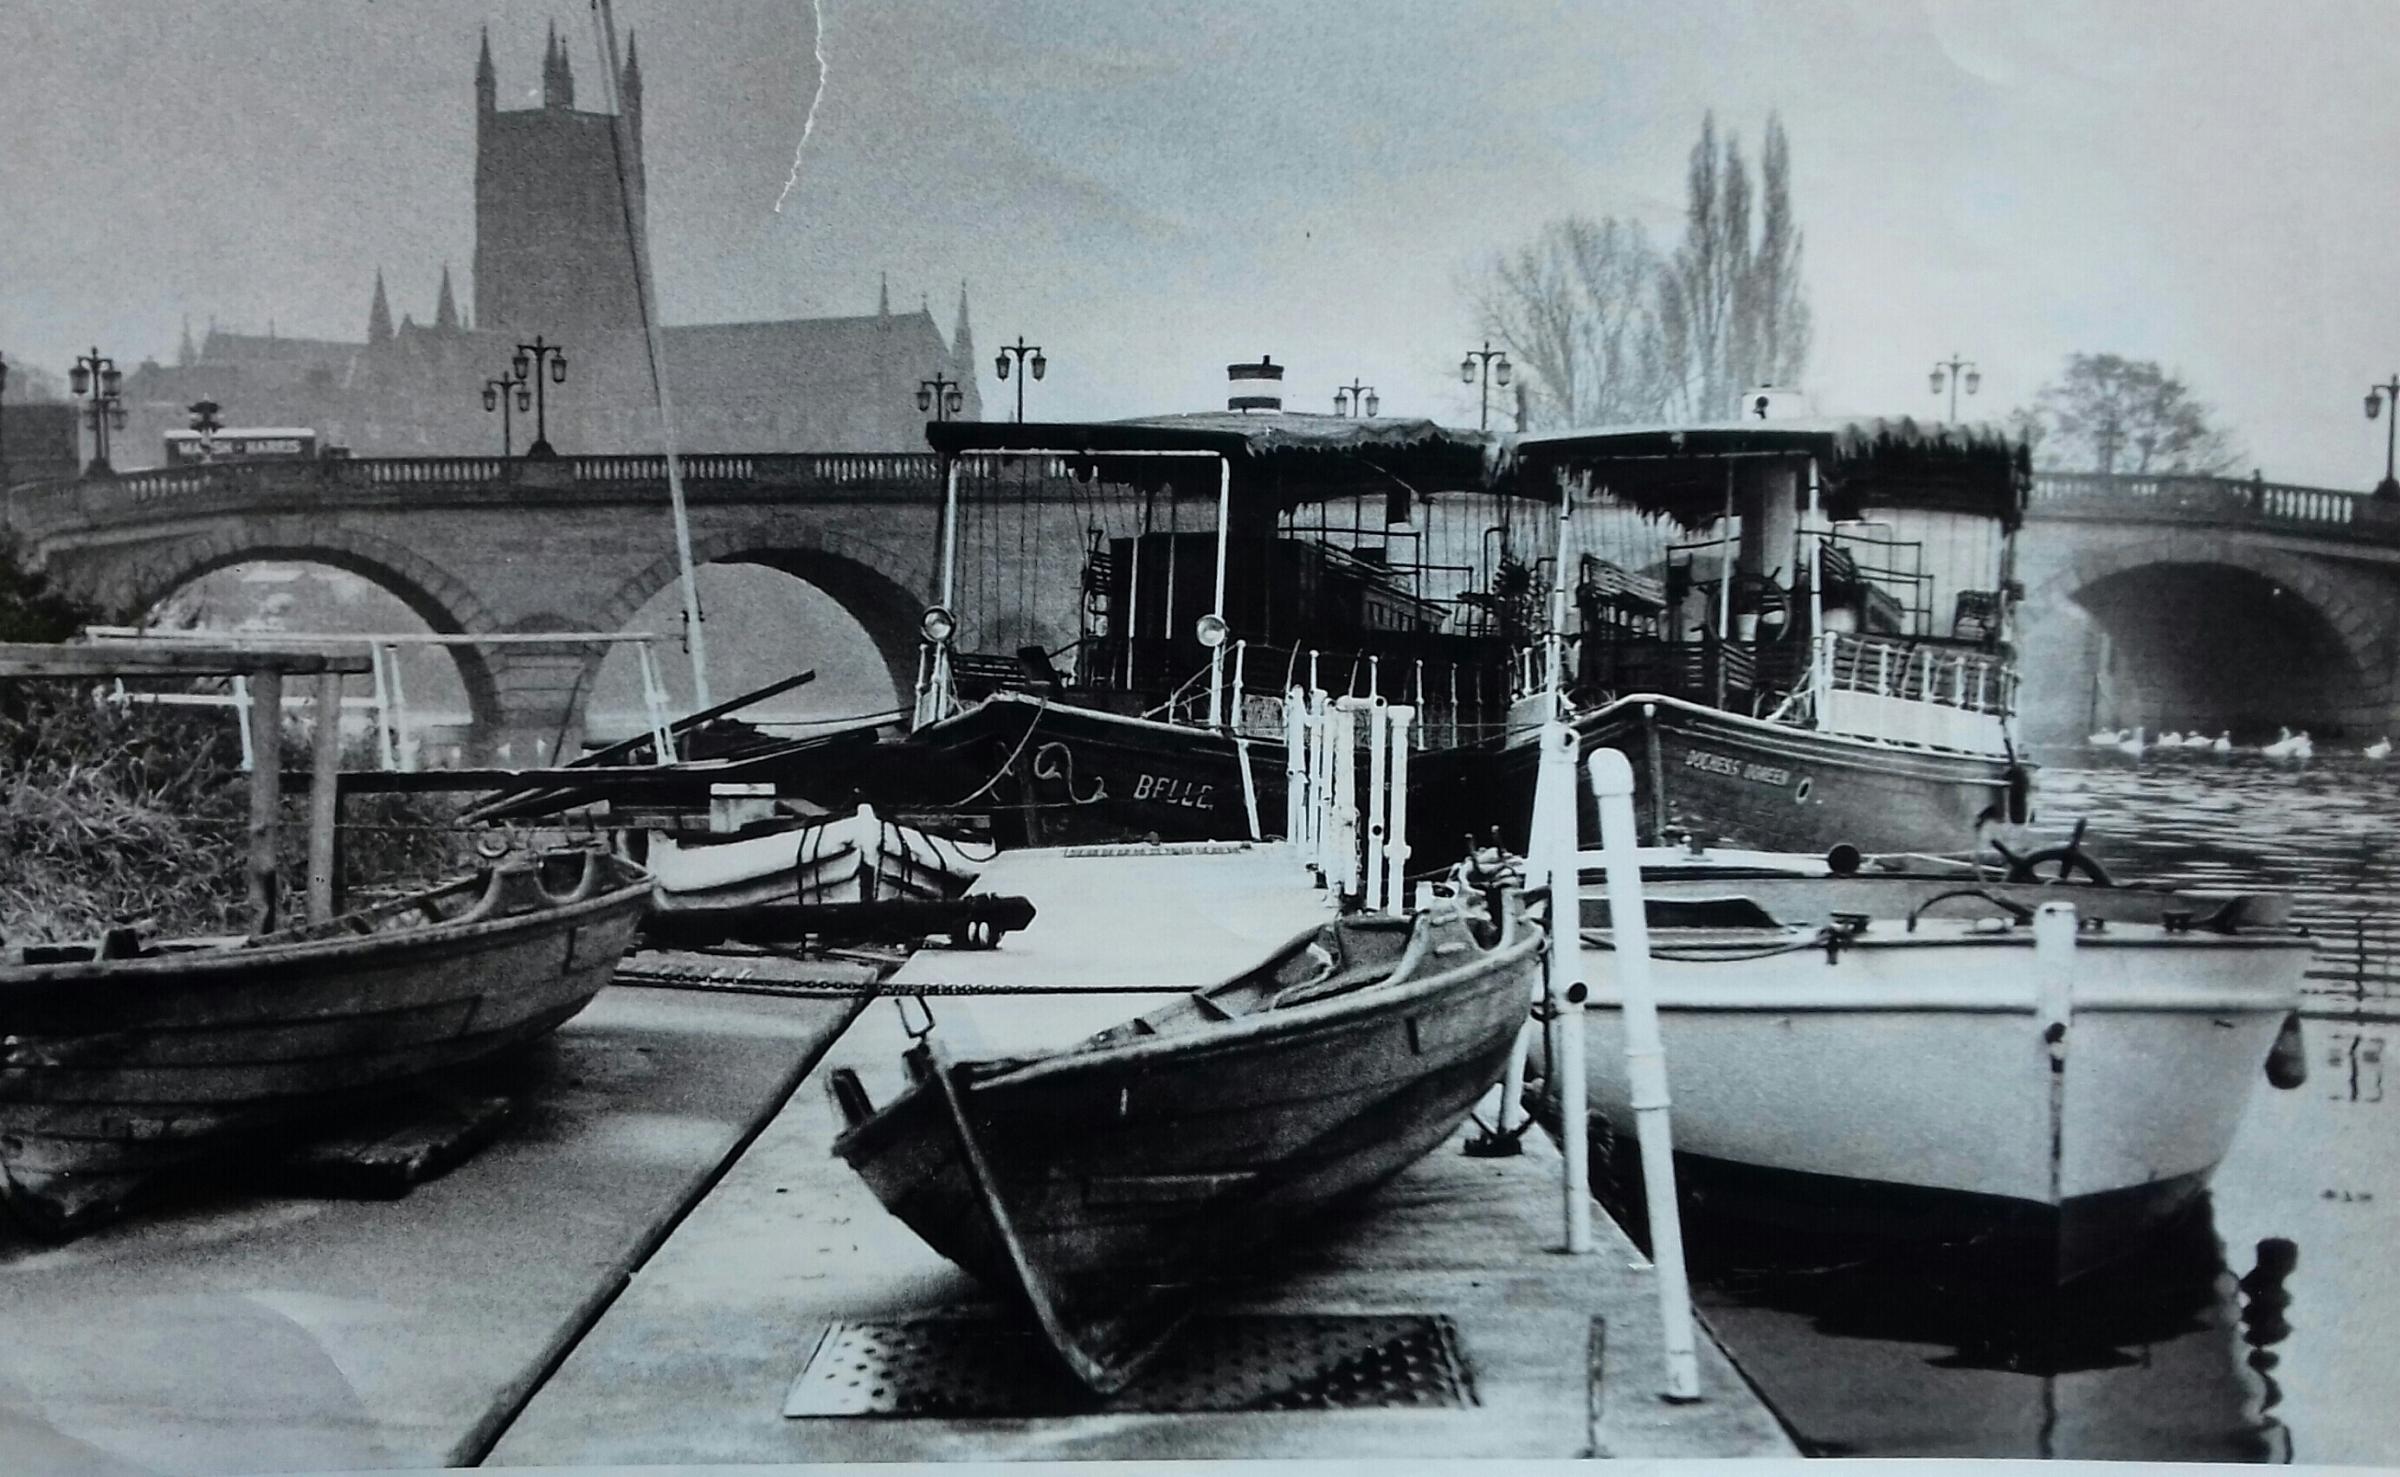 Two of the barges, Belle and Duchess Doreen, which took part in the Worcester river procession in 1946, seen at North Quay 20 years later